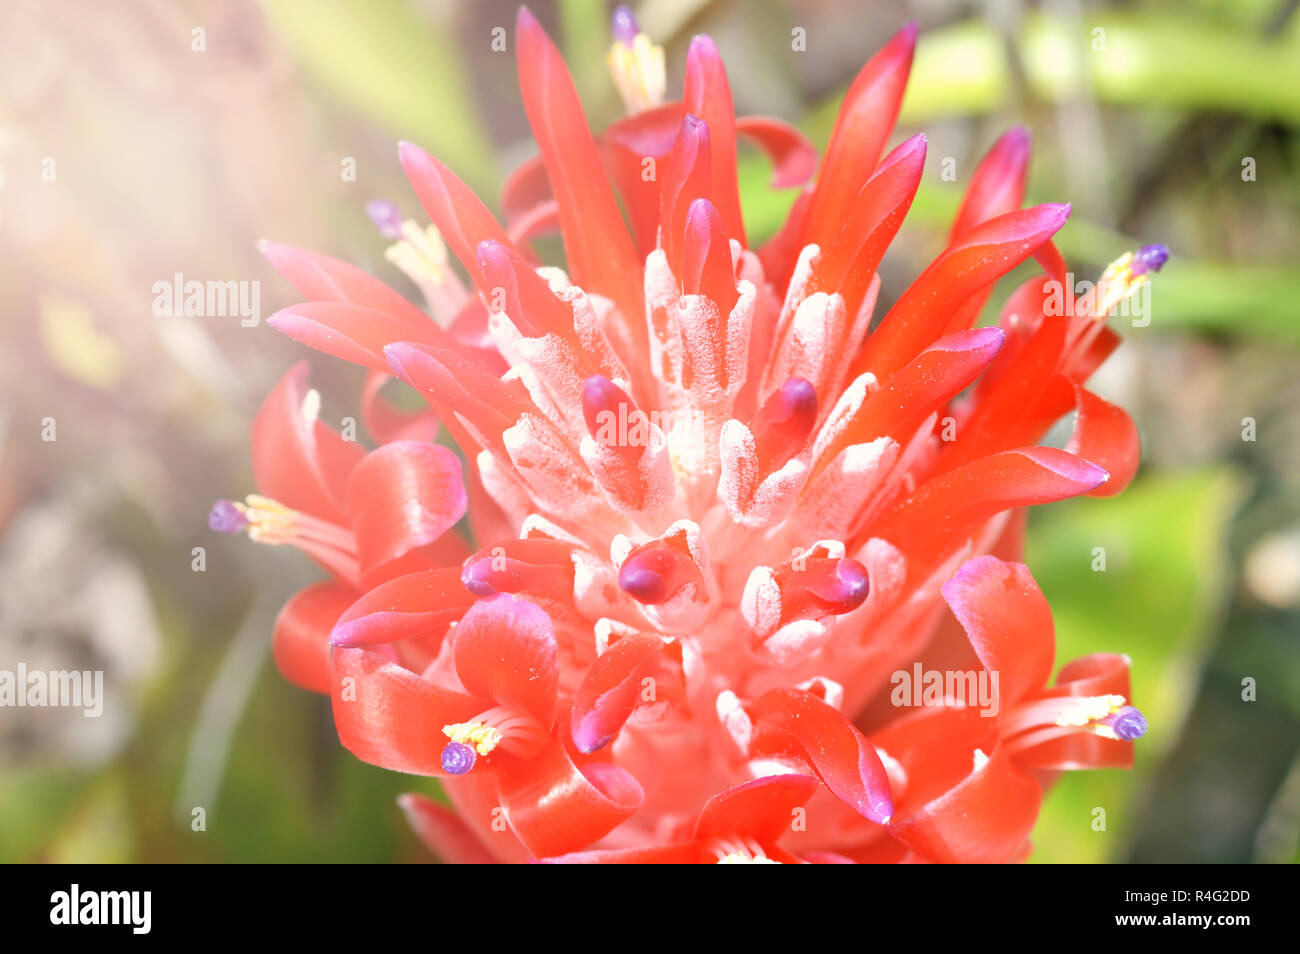 bromeliad red flower / close up of bromeliad plant with red flower in the garden Stock Photo